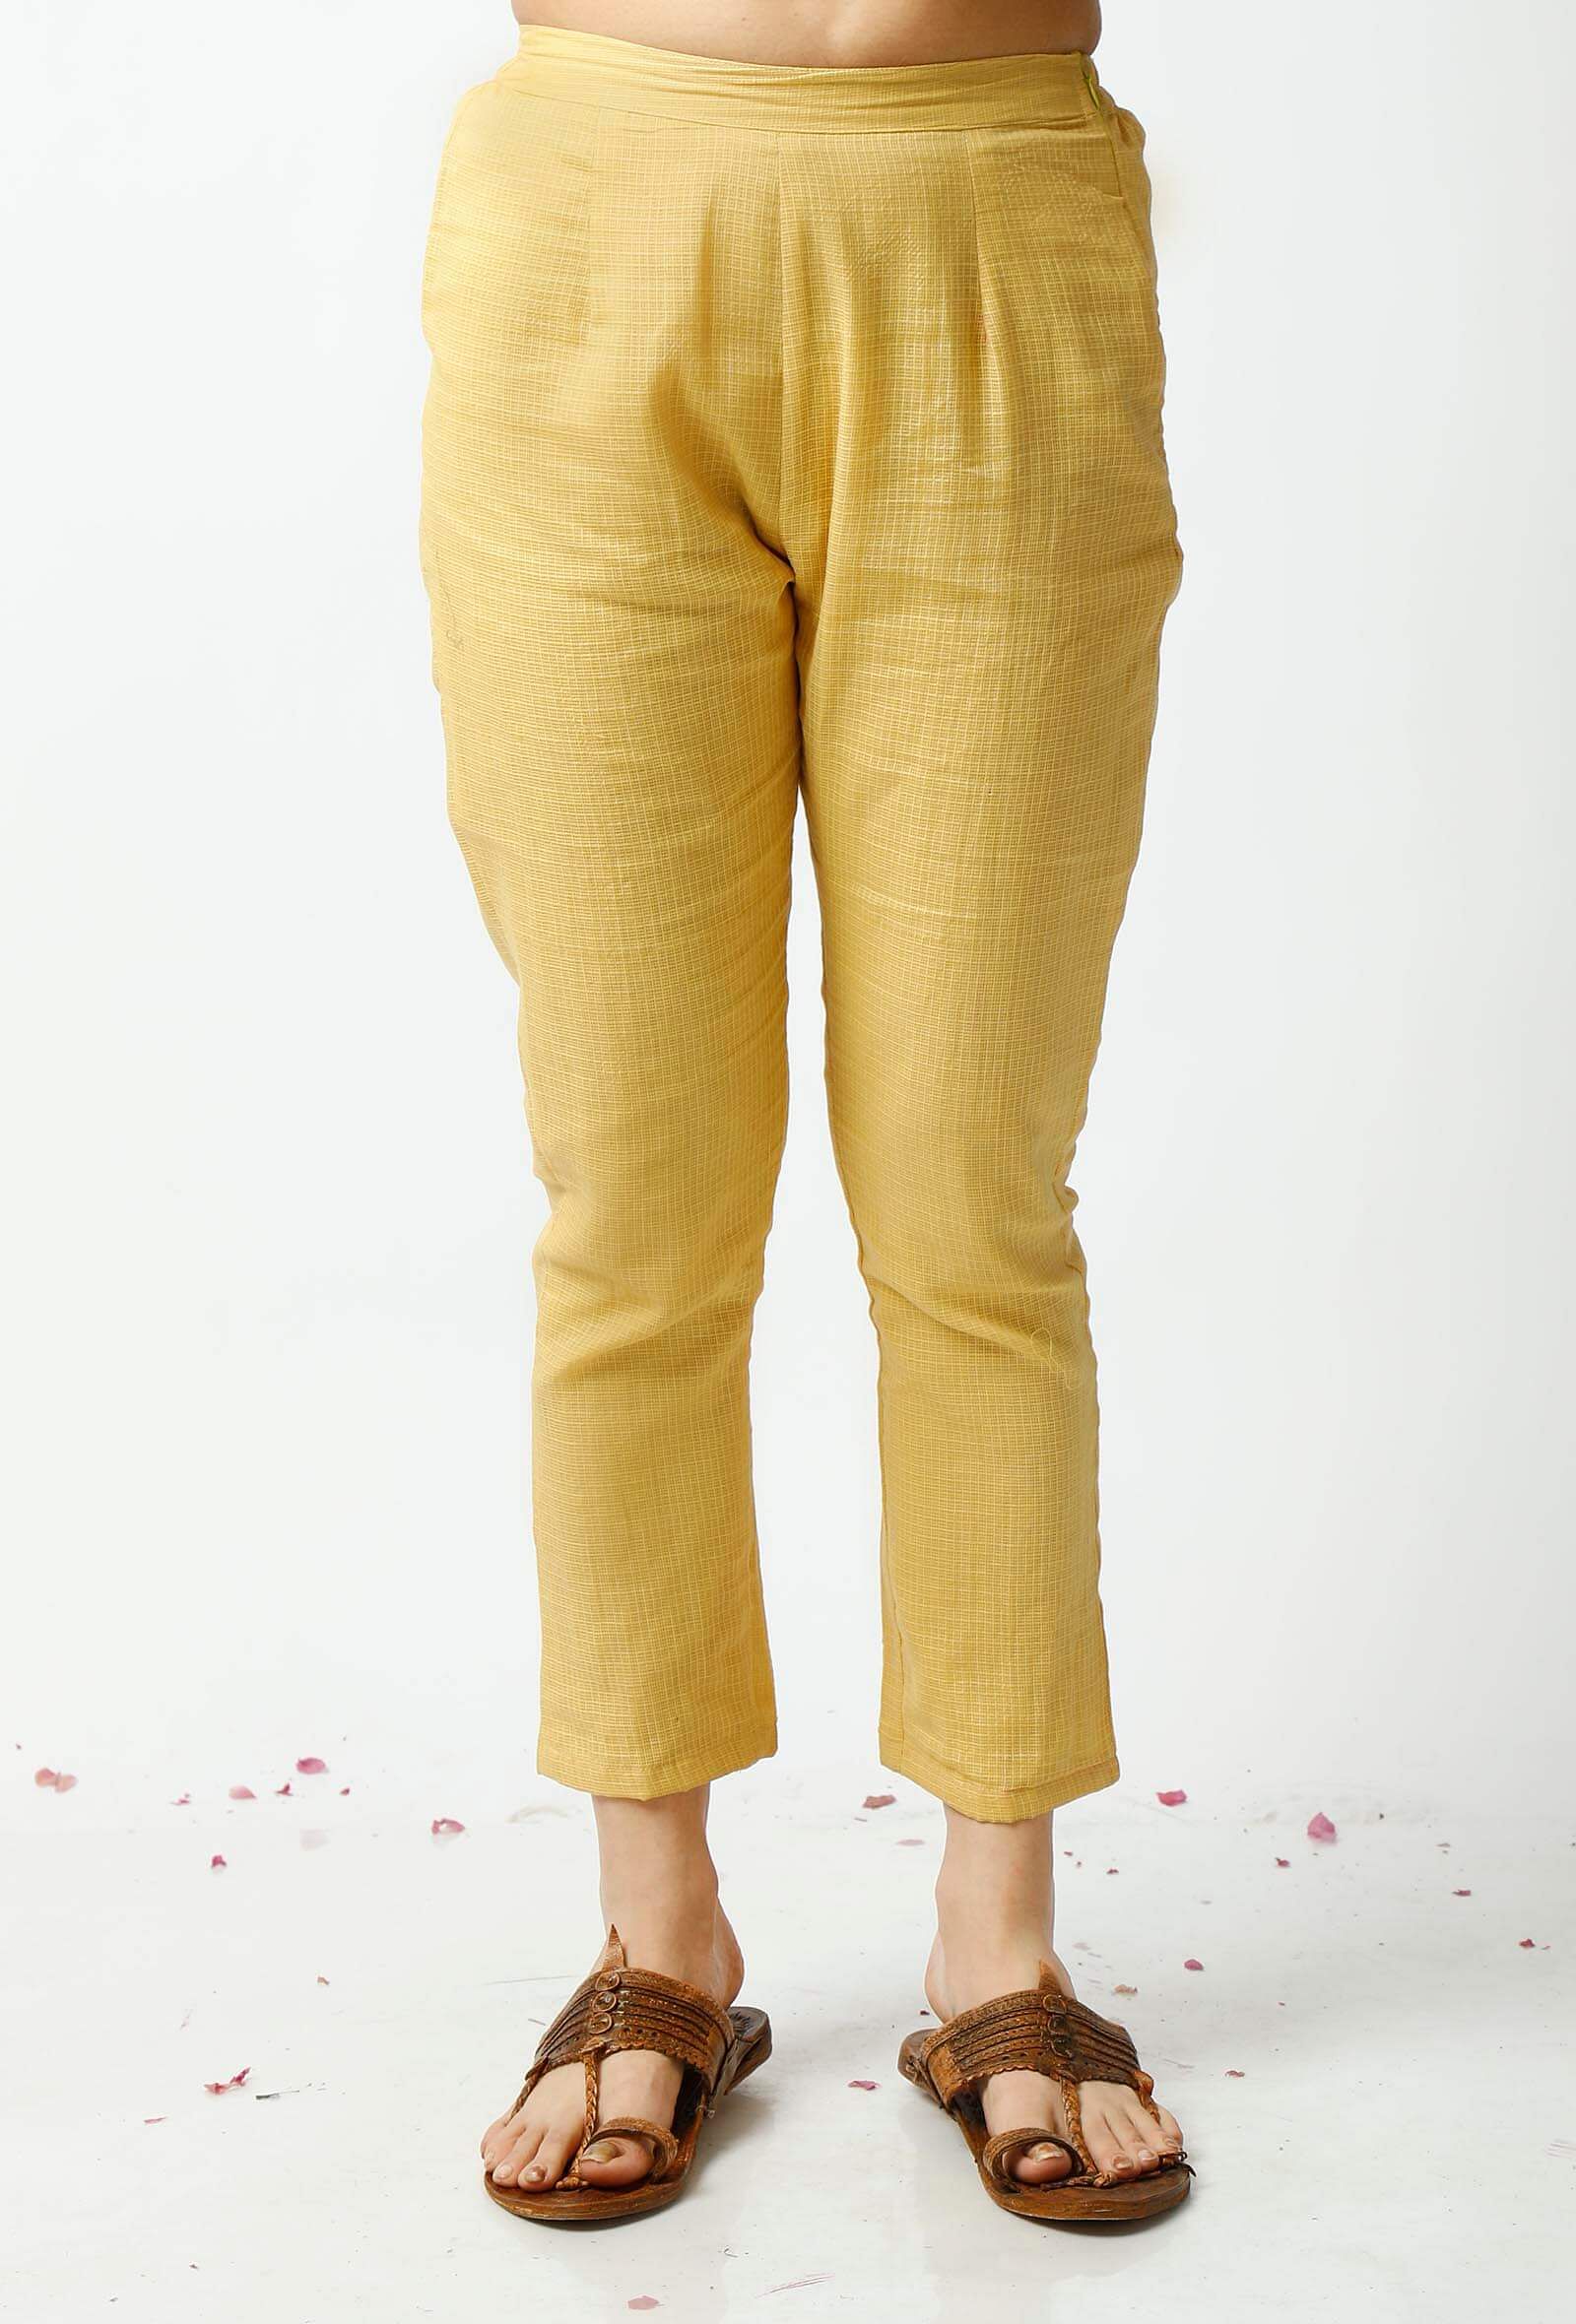 Yellow Afghani Trousers  Cottons Jaipur